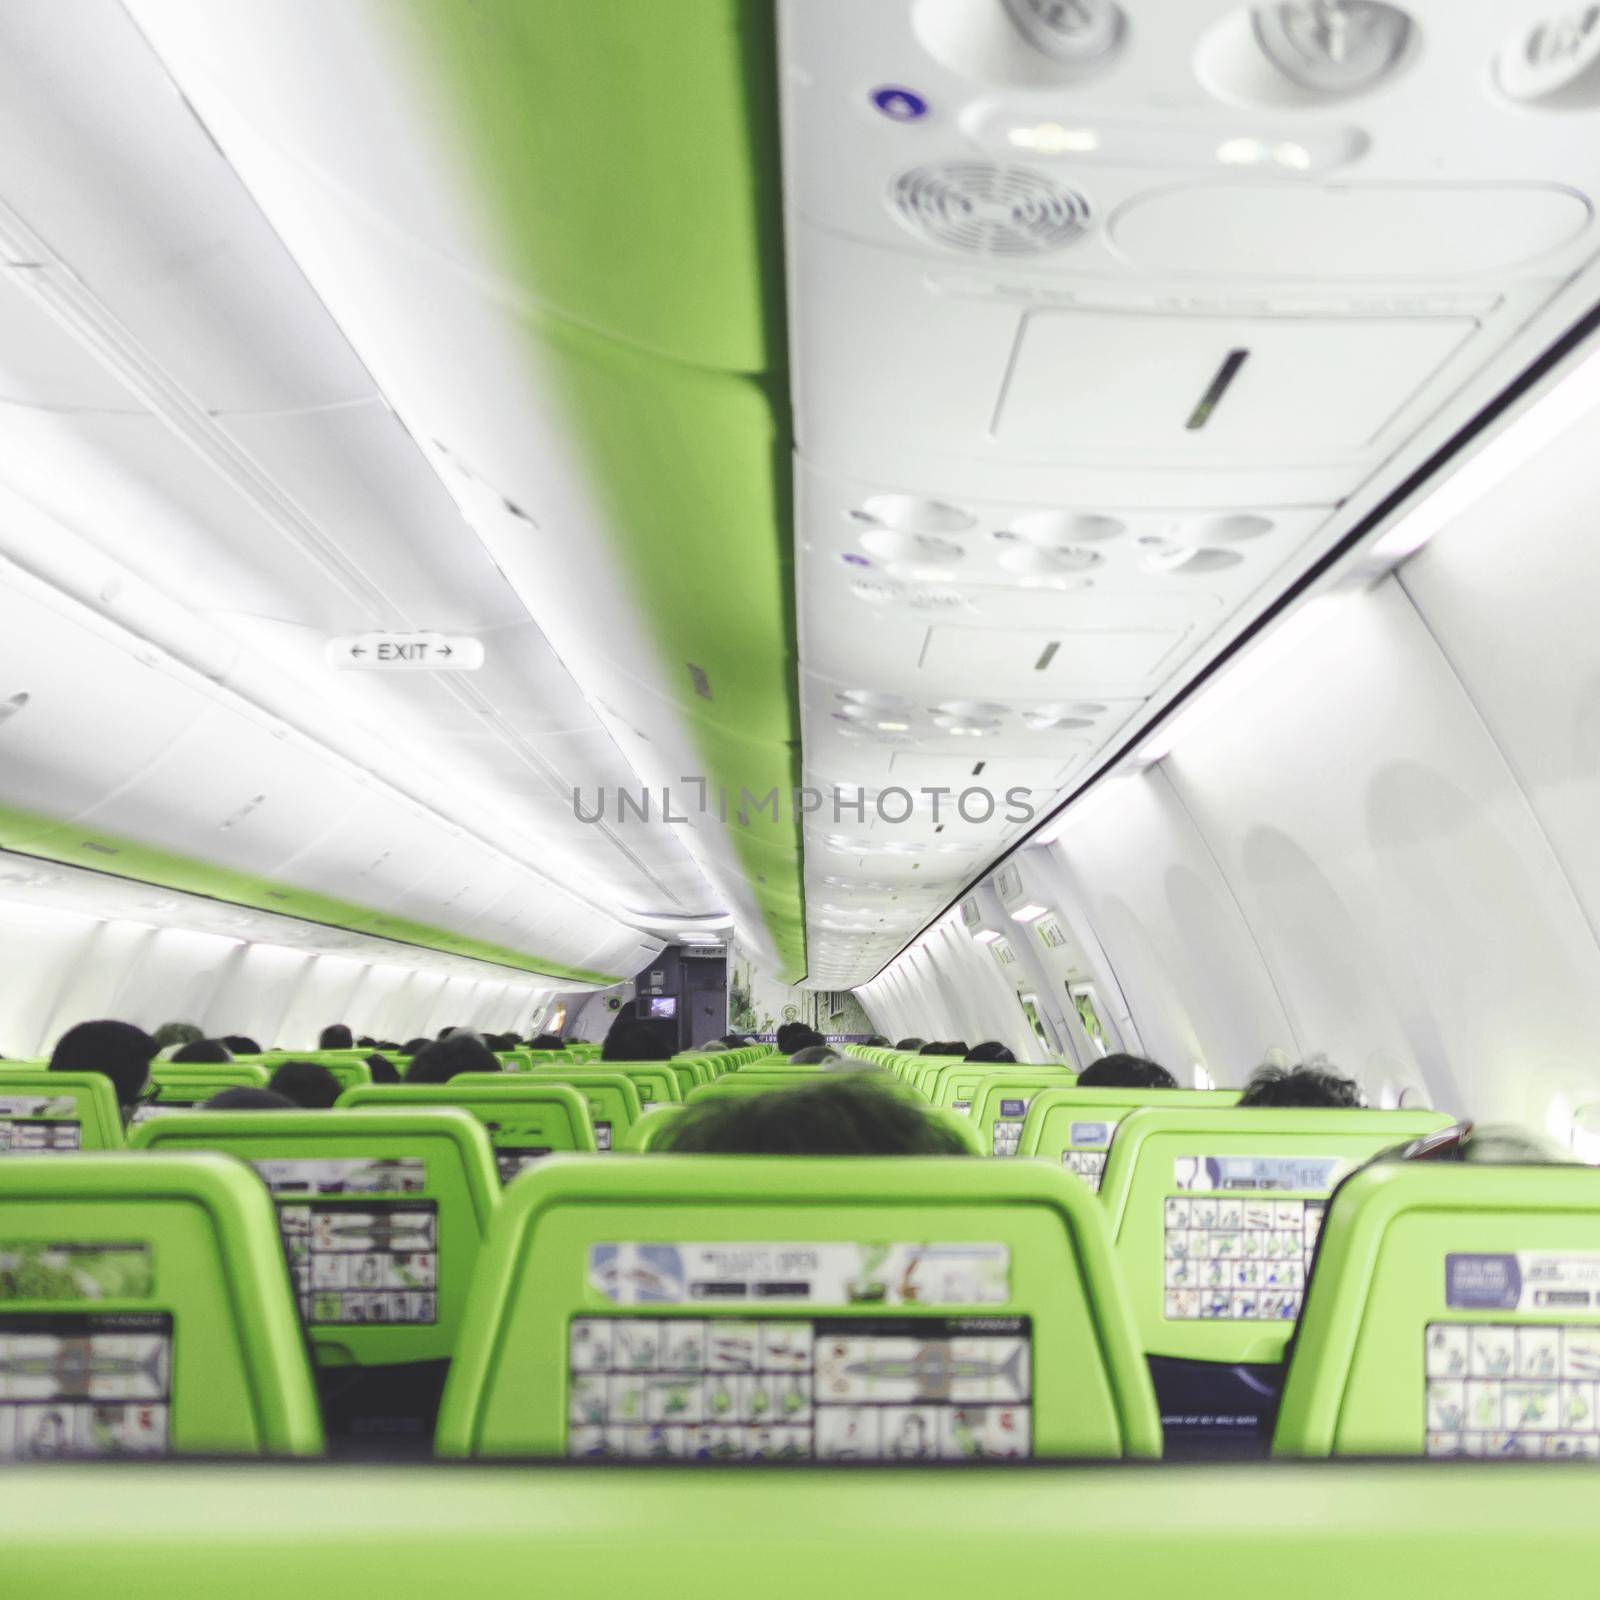 People on board the plane. Blurred foreground. Airplane interior with people sitting on green seats.